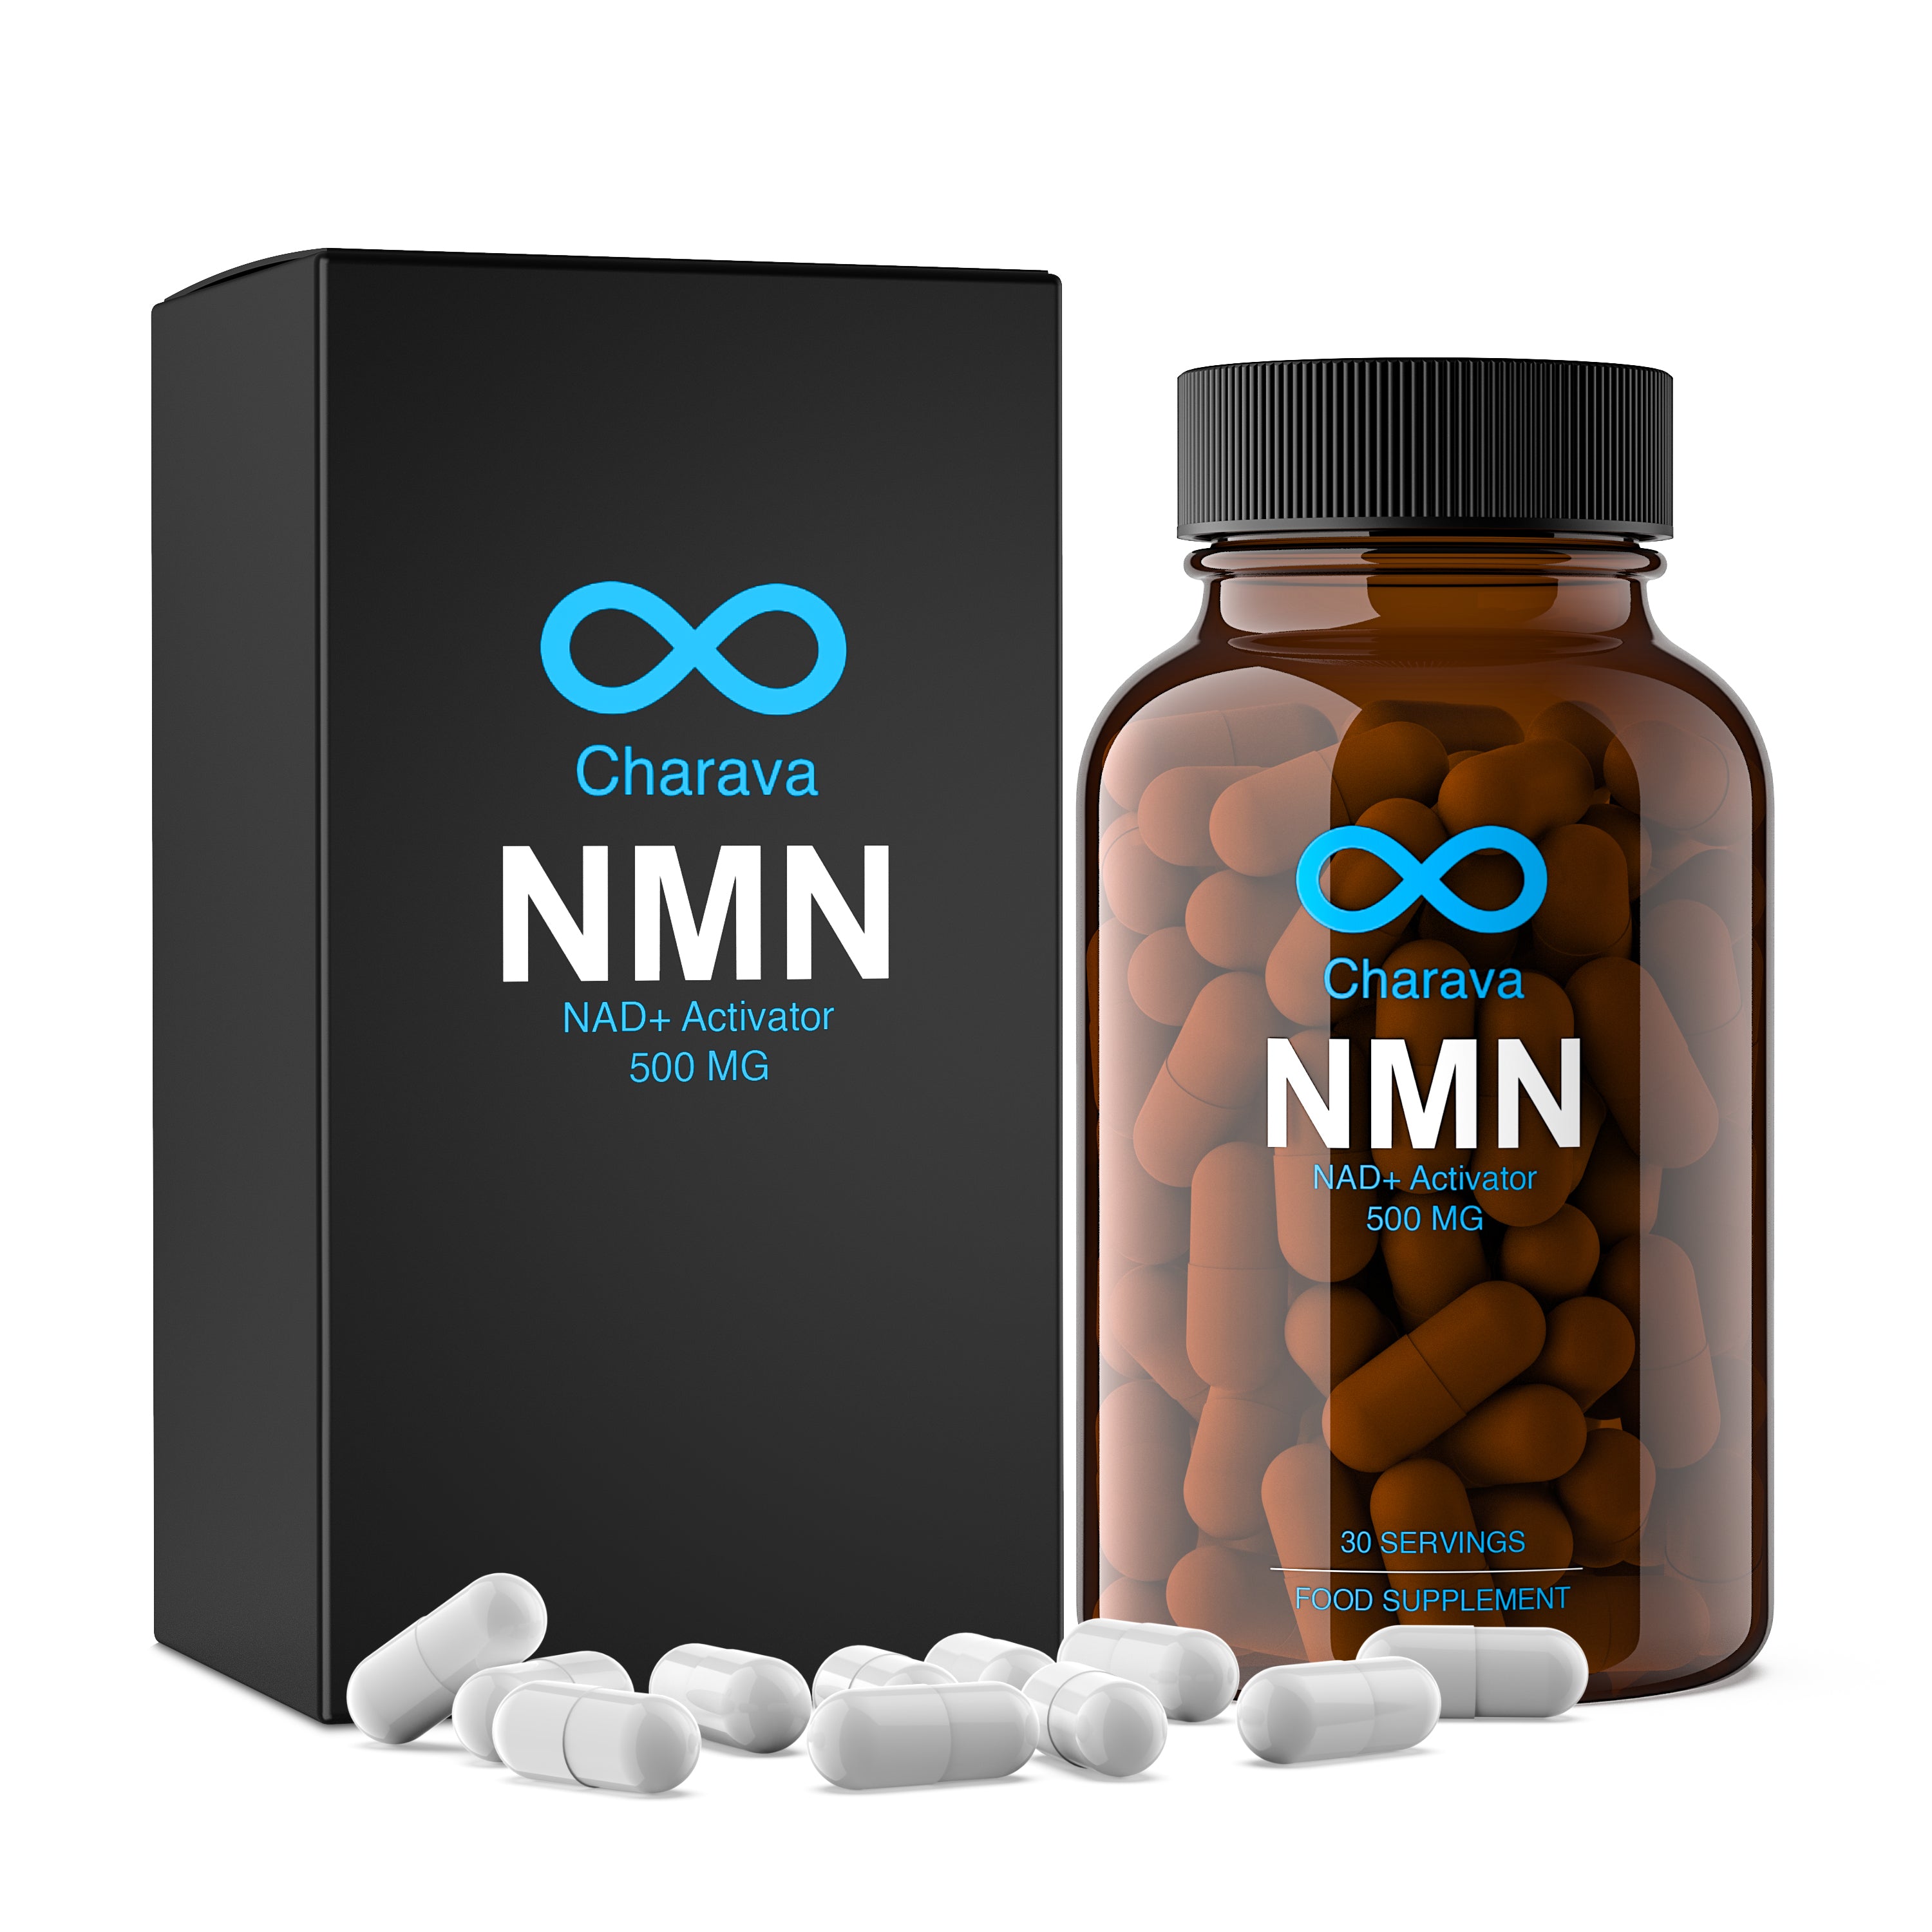 Charava NMN 500mg - NMN Supplements South Africa - Nicotinamide Mononucleotide